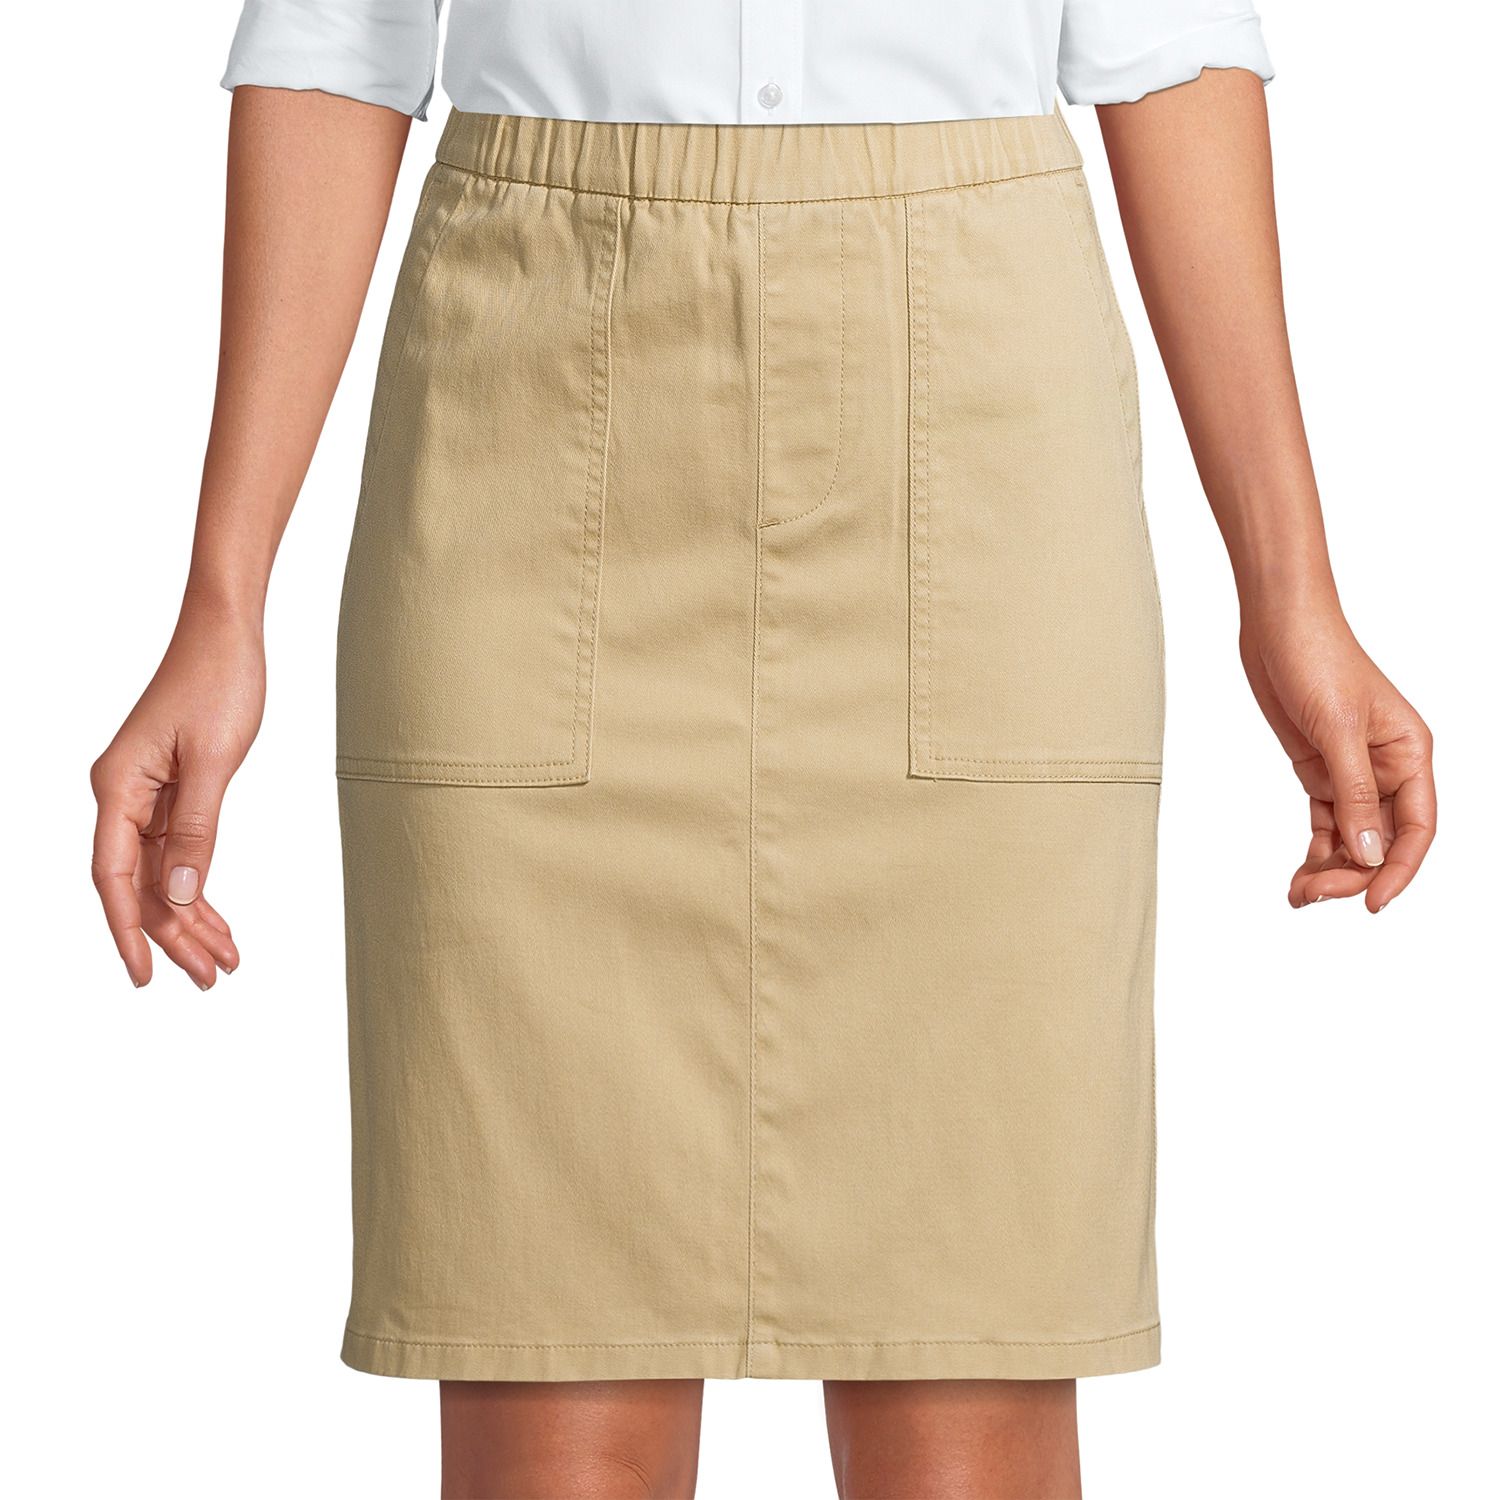 Image for Lands' End Petite Pull On Chino Skort at Kohl's.